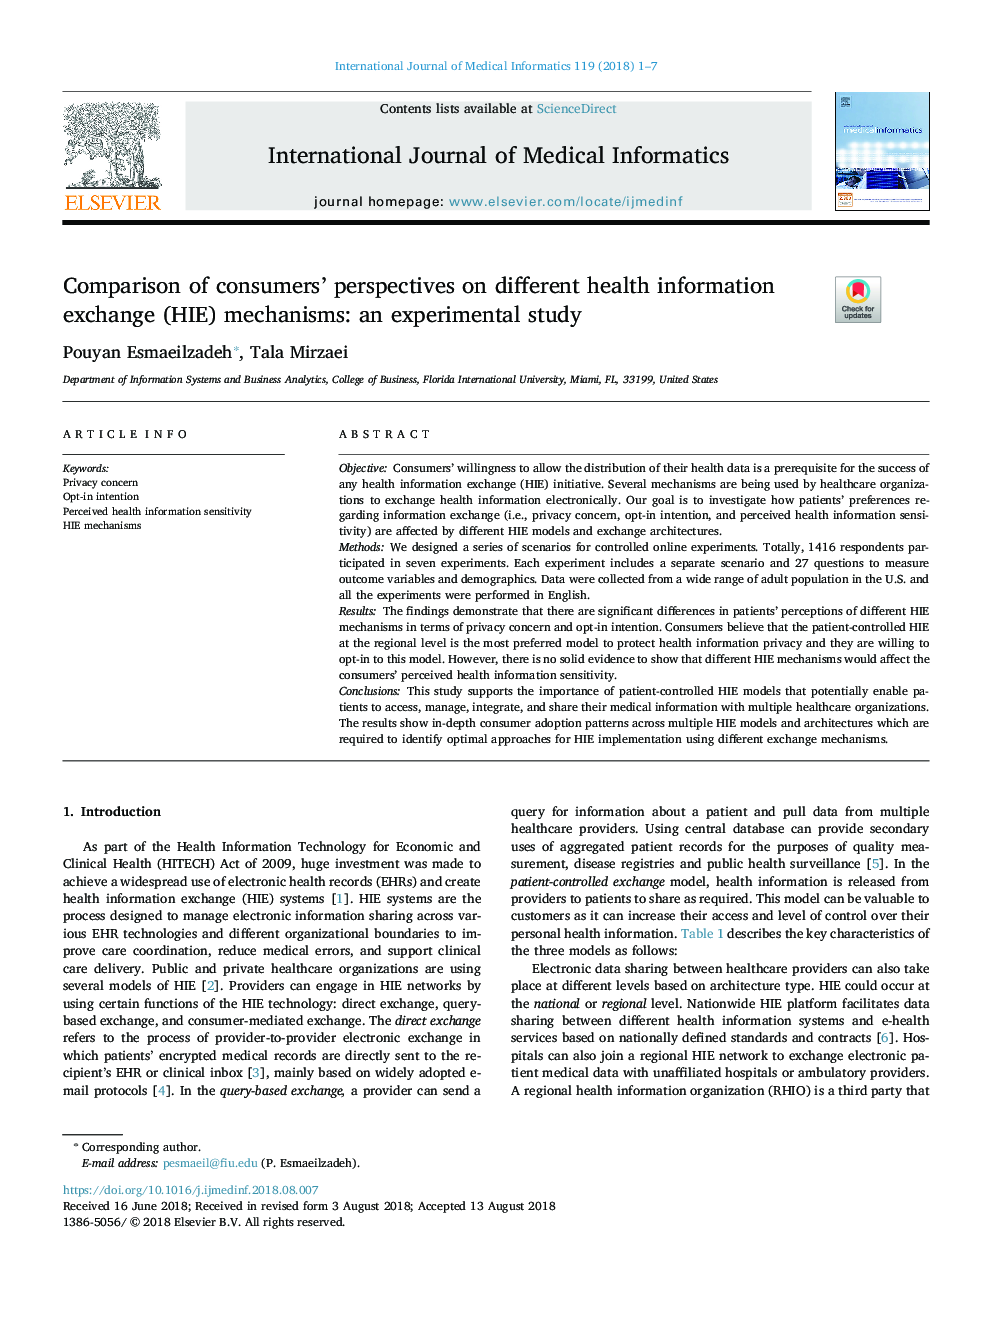 Comparison of consumers' perspectives on different health information exchange (HIE) mechanisms: an experimental study